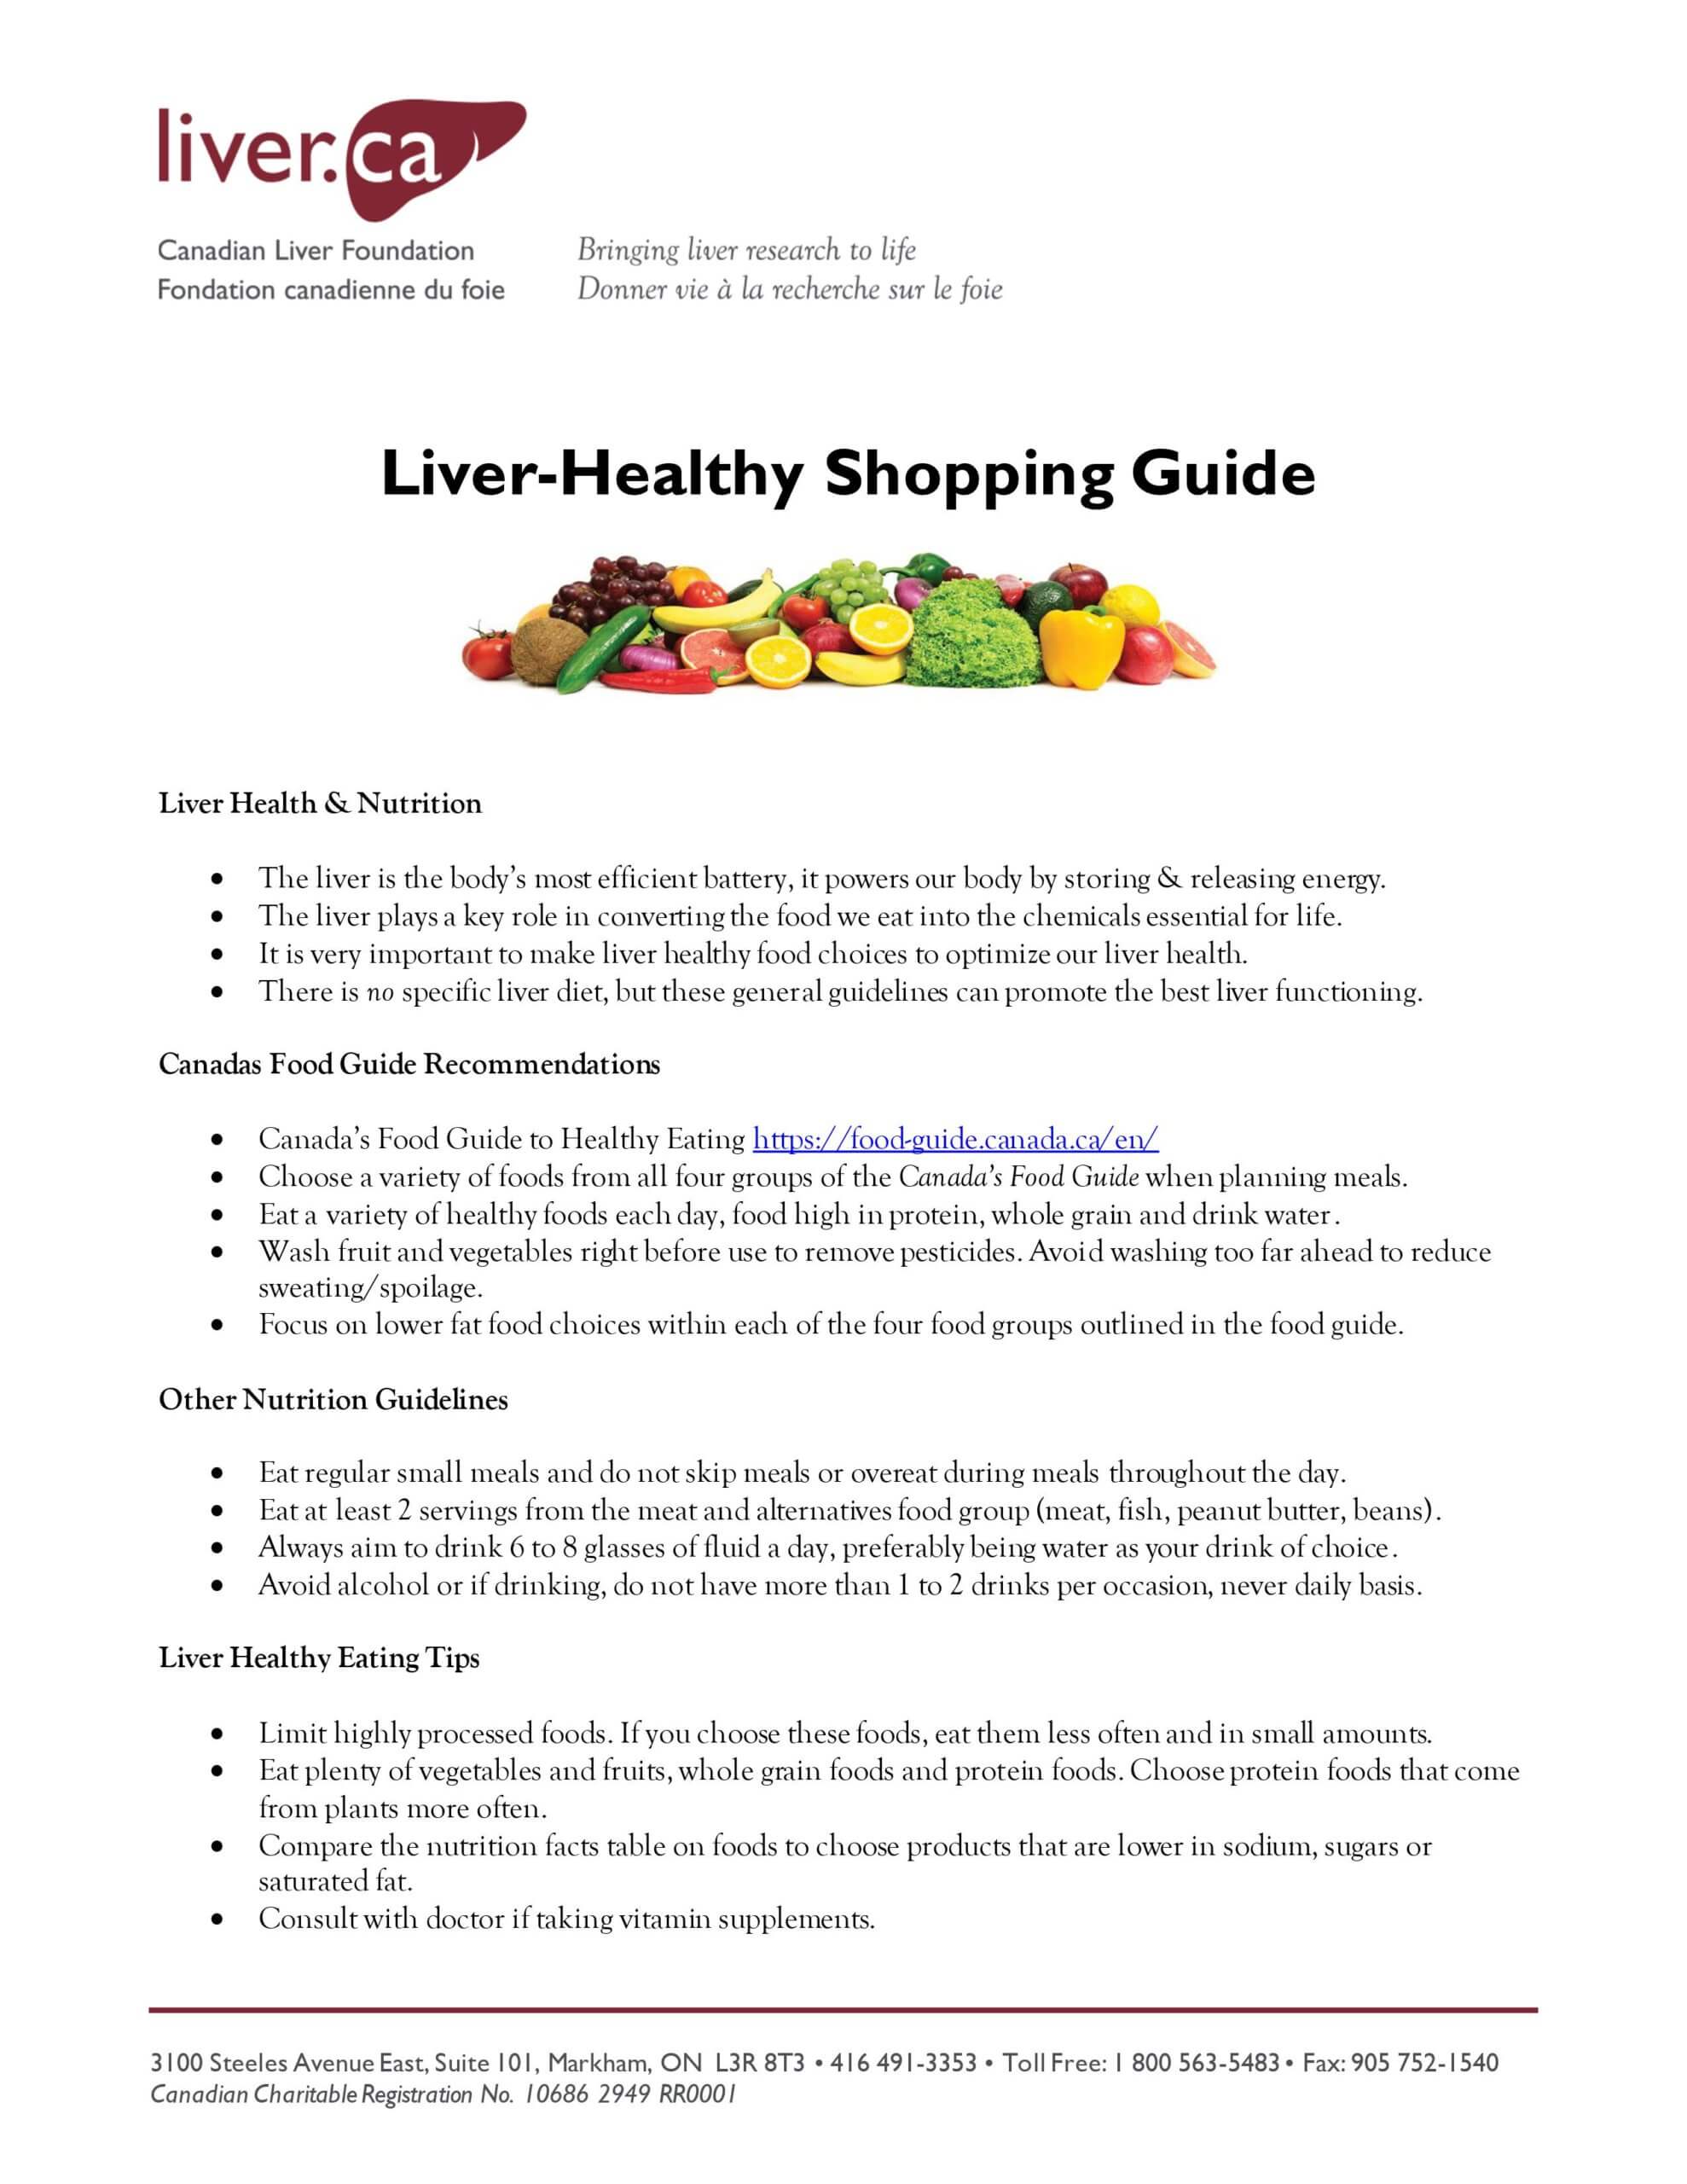 Image of the liver healthy shopping guide information sheet